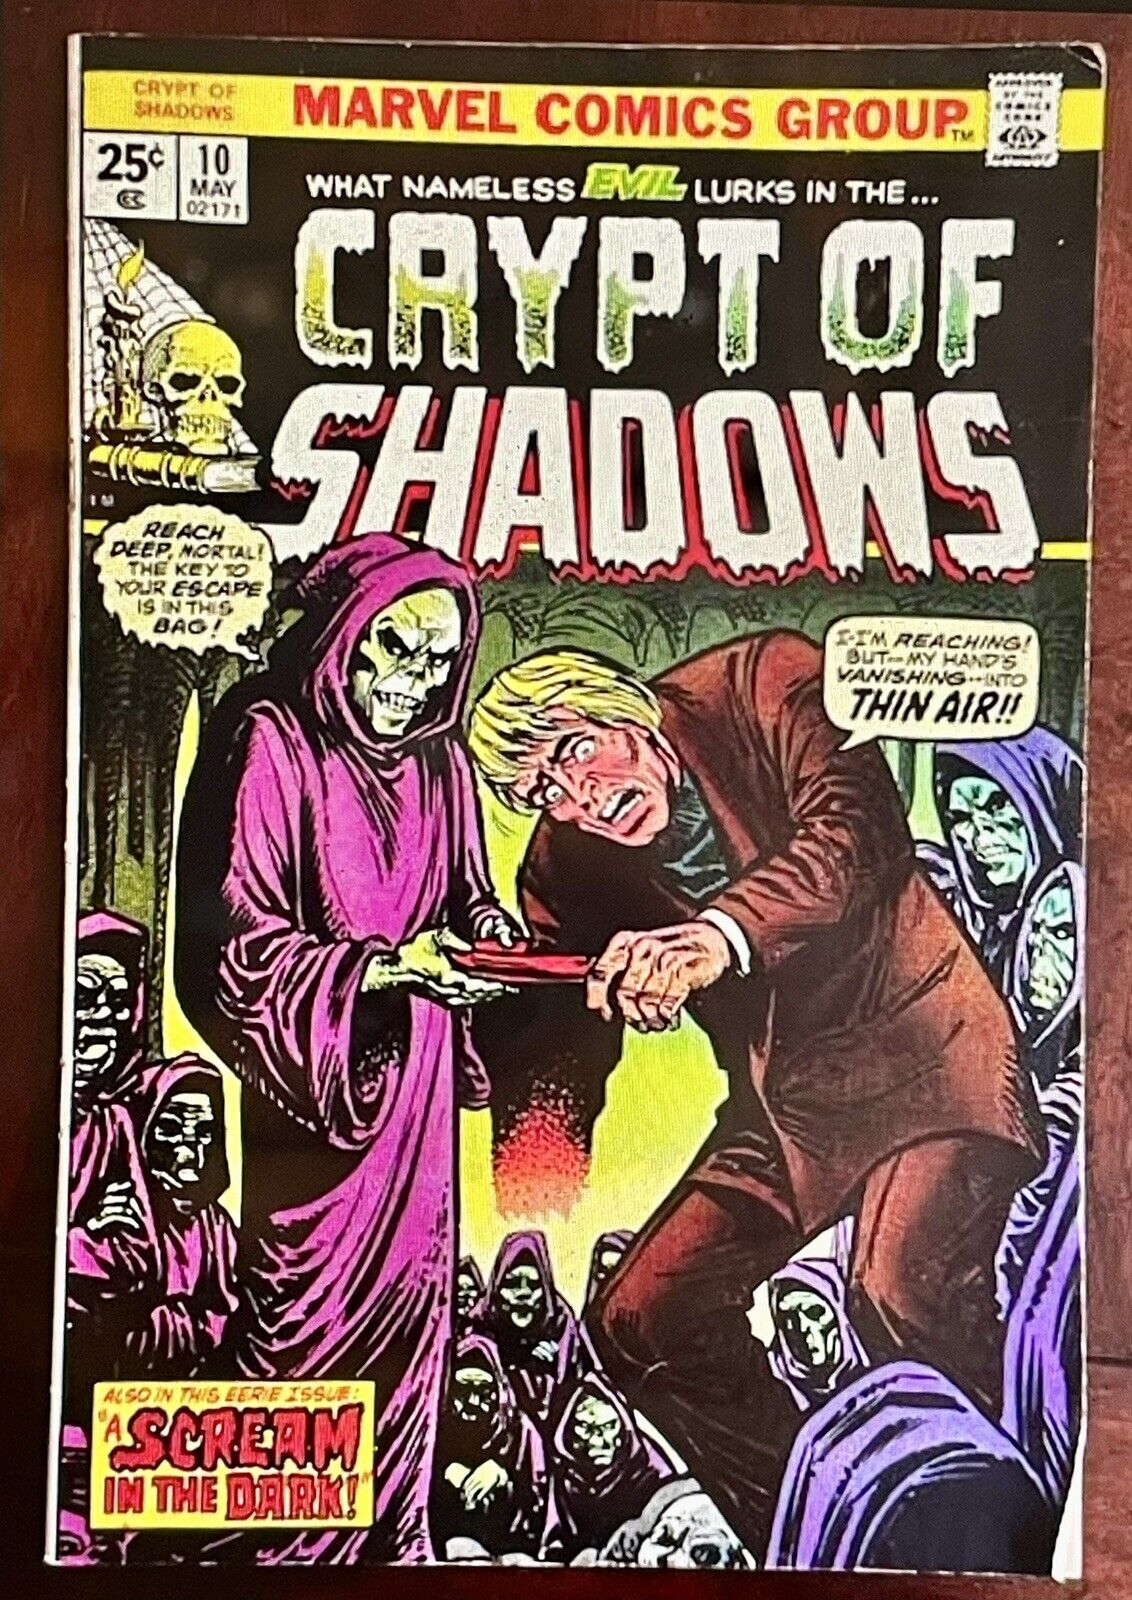 Vintage Marvel Comics Book Crypt of Shadows Horror #10 May 1974 Bronze Age